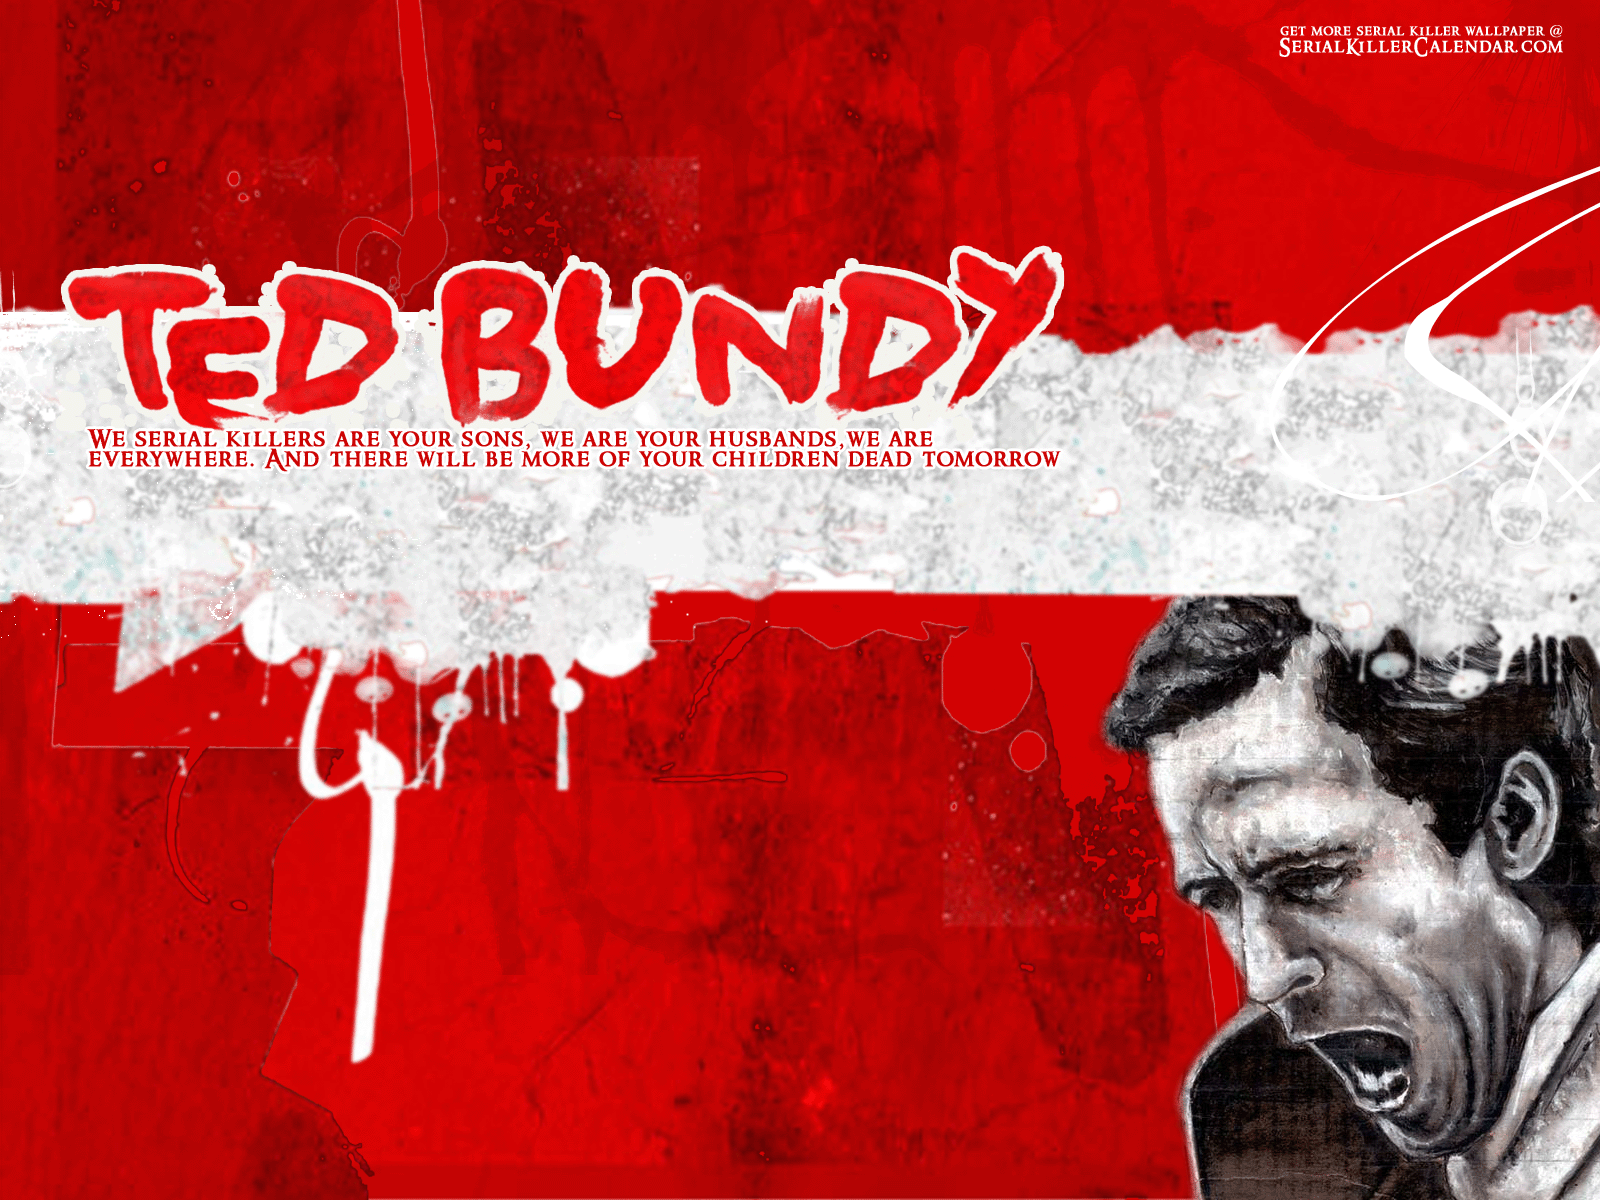 Yes, that really is a Ted Bundy desktop wallpaper. True crime